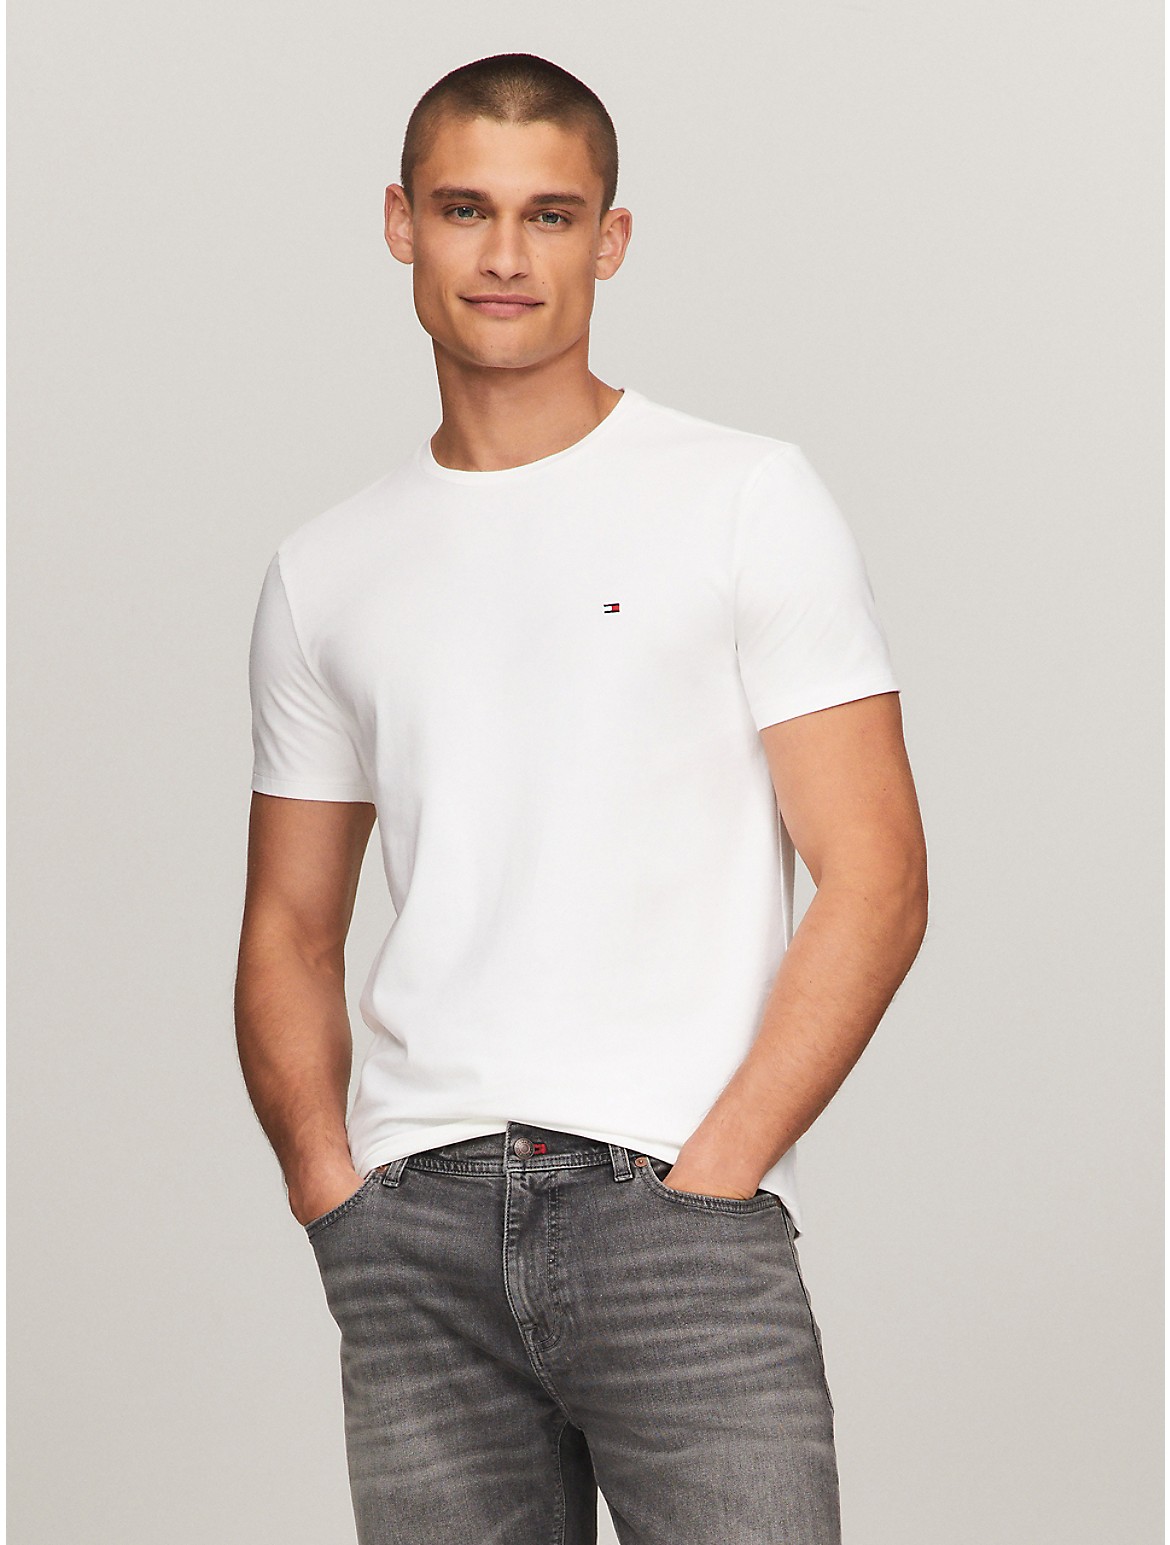 Tommy Hilfiger Men's Everyday Solid T-Shirt - White - XS